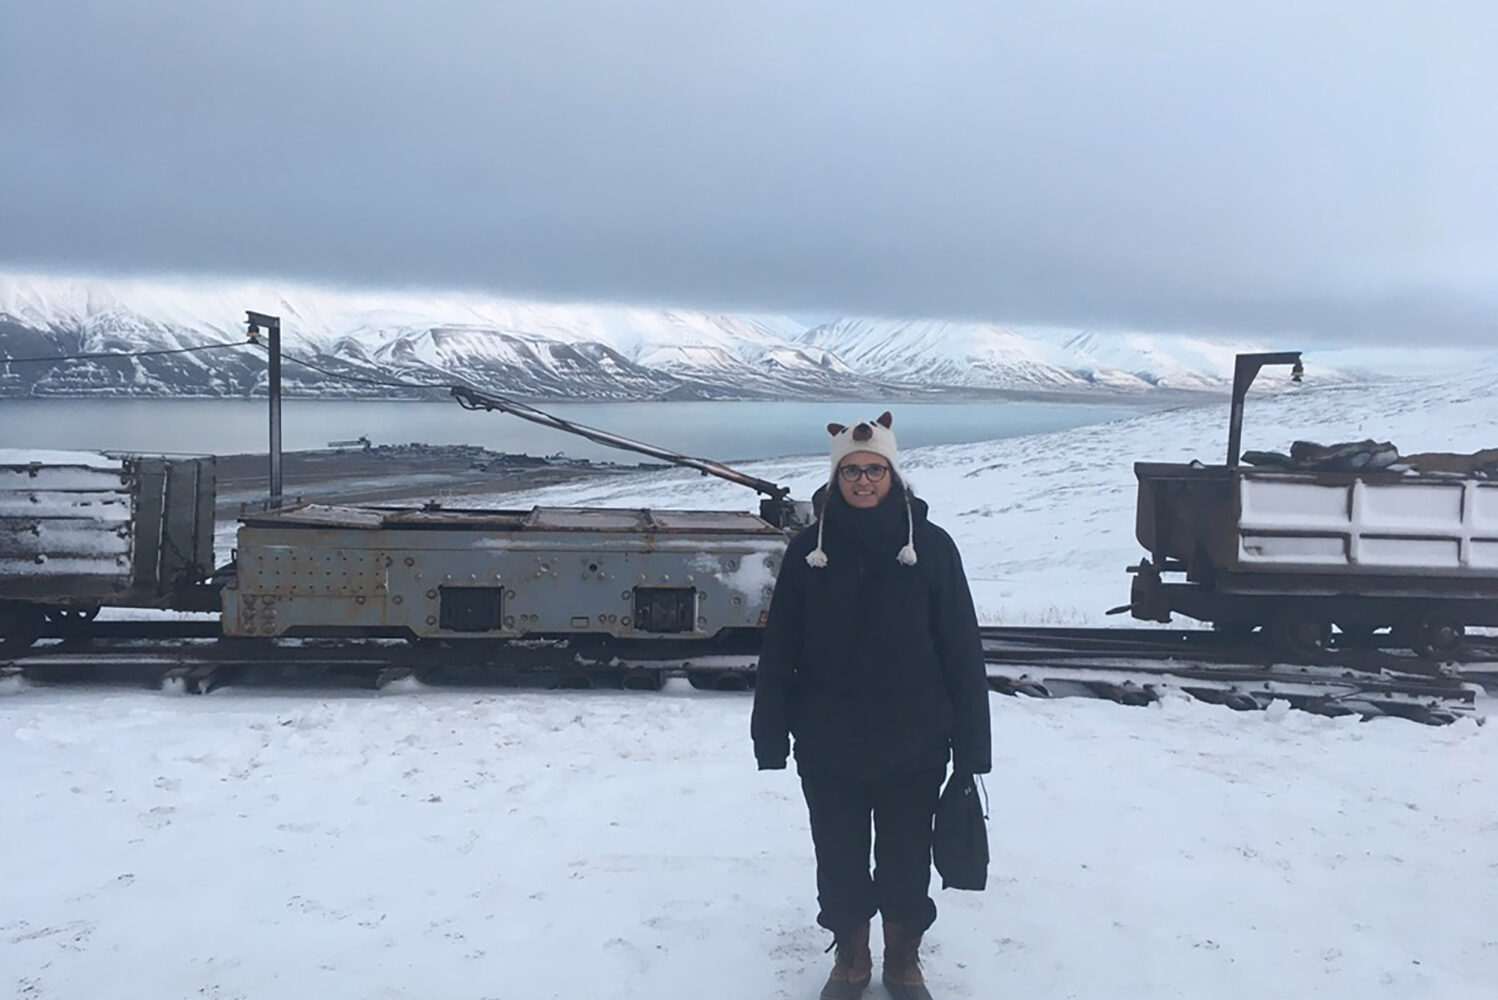 Photo: Adriana Craciun, a CAS professor of English, outside Mine 3, a shuttered coal mine near Longyearbyen in Svalbard. A white woman bundled up in black winter gear stands and poses in front of an old coal railway in a snowy landscape. Snowy mountains can be seen in the distance.